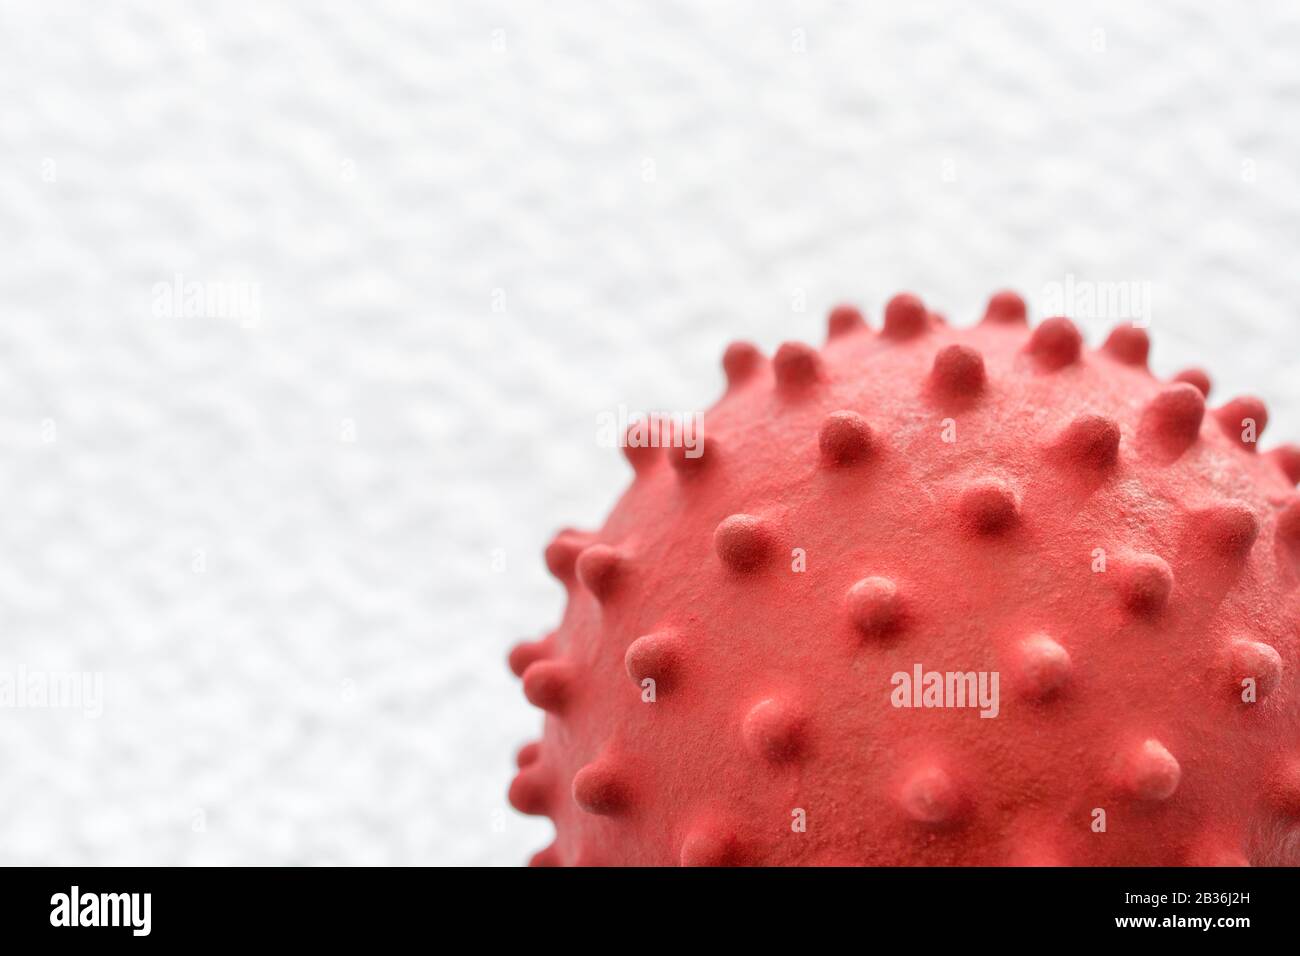 Isolated coronavirus model on textured white b/g. For Covid-19, flu virus, SARS, MERS. Medical abstract, infectious disease, virology, virus research. Stock Photo